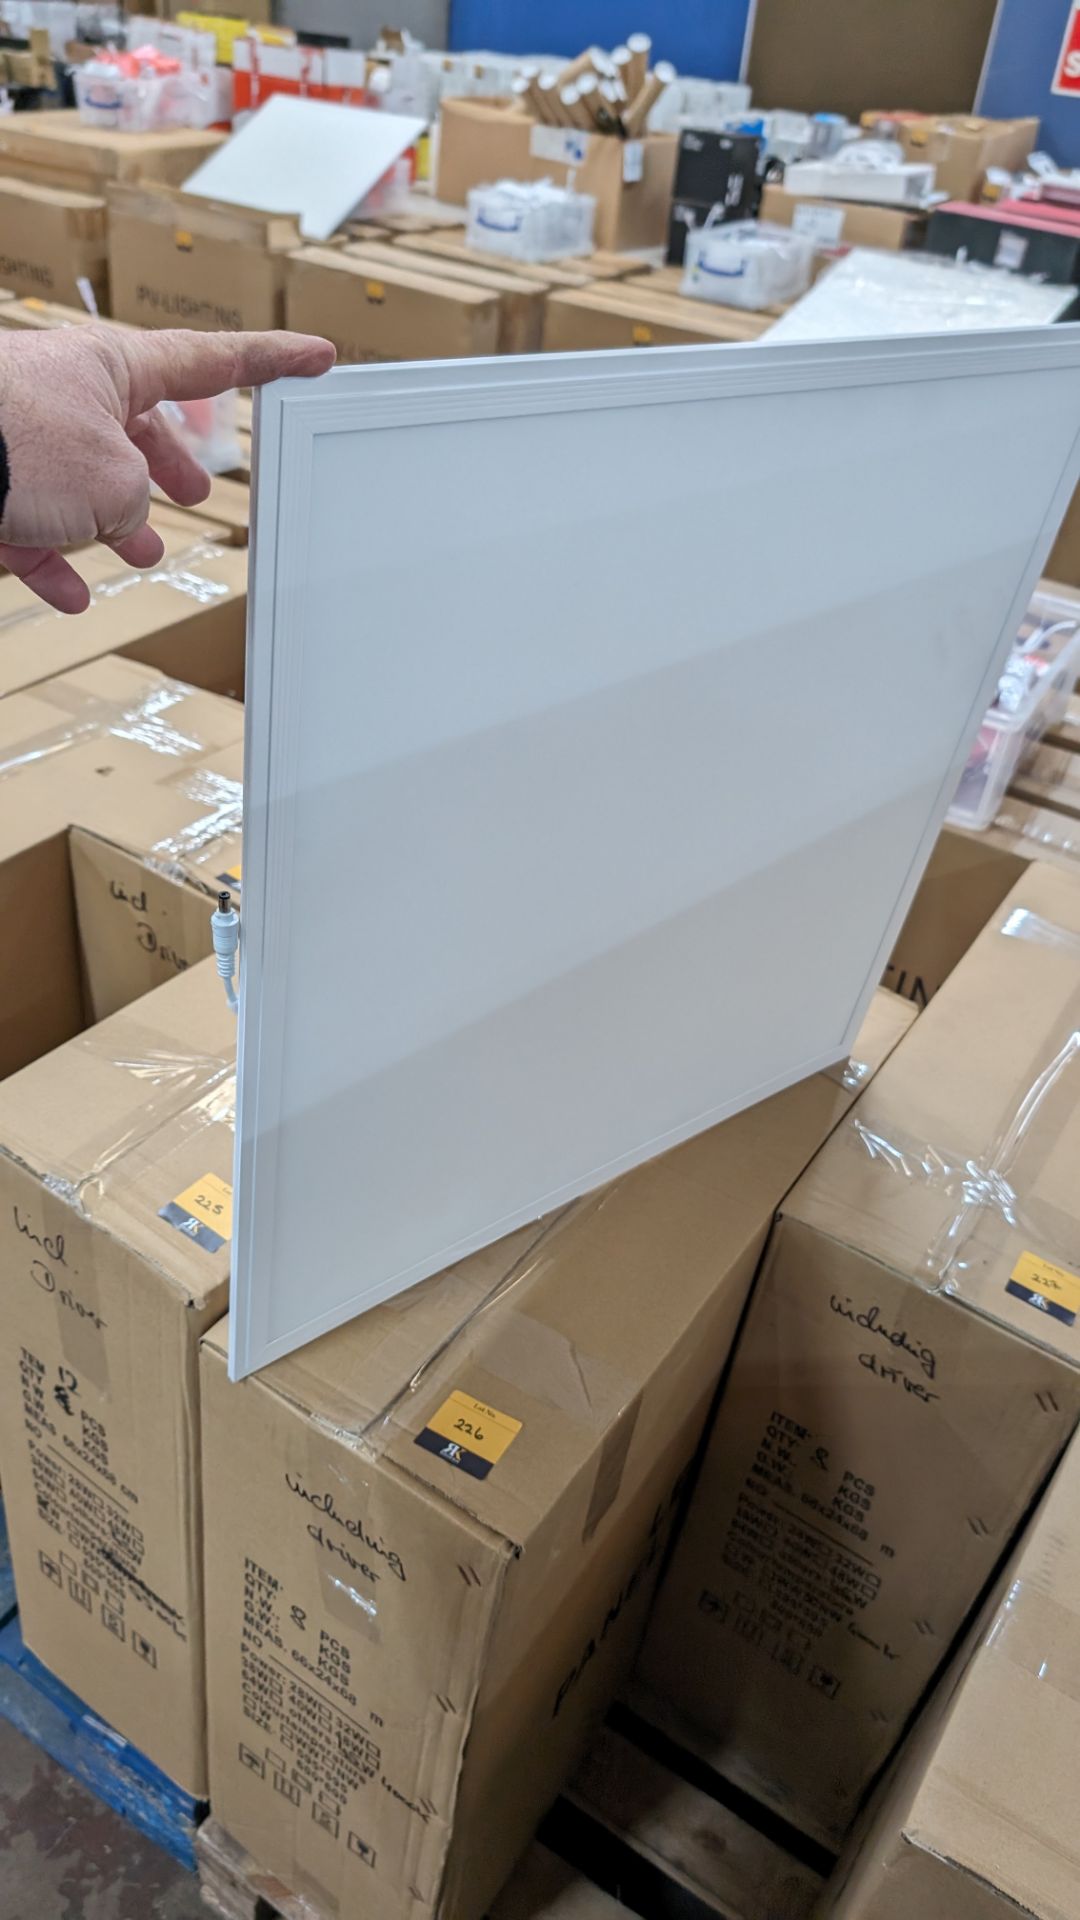 8 off 595mm x 595mm 4000k 45w LED lighting panels, each including driver - 1 carton - Image 2 of 4